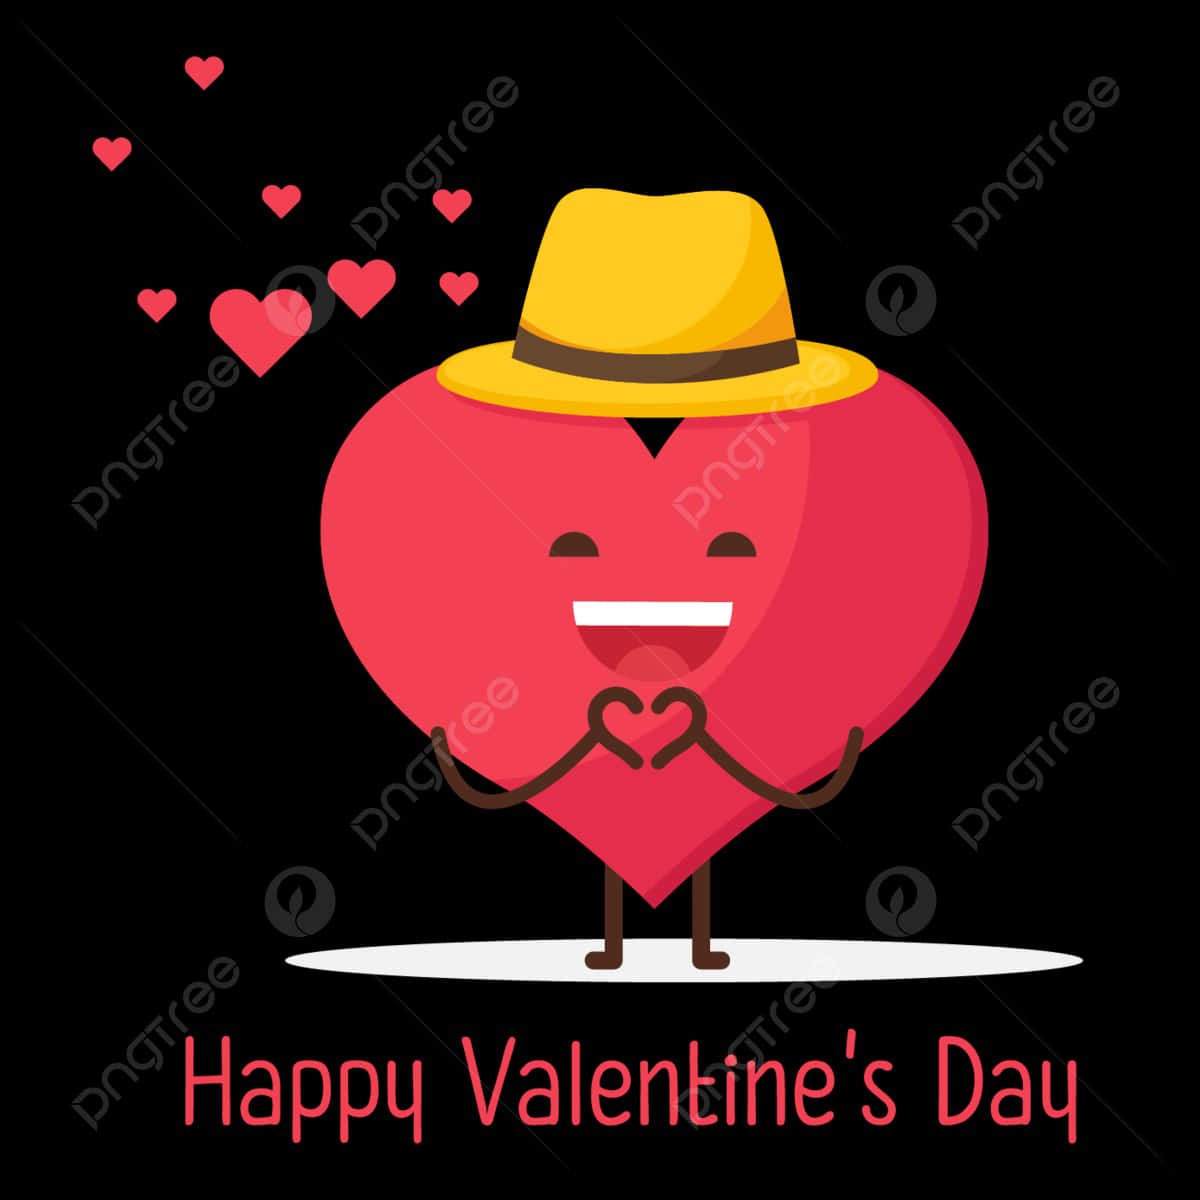 Happy Valentine's Day - Cartoon Heart With Hat And Heart Wallpaper